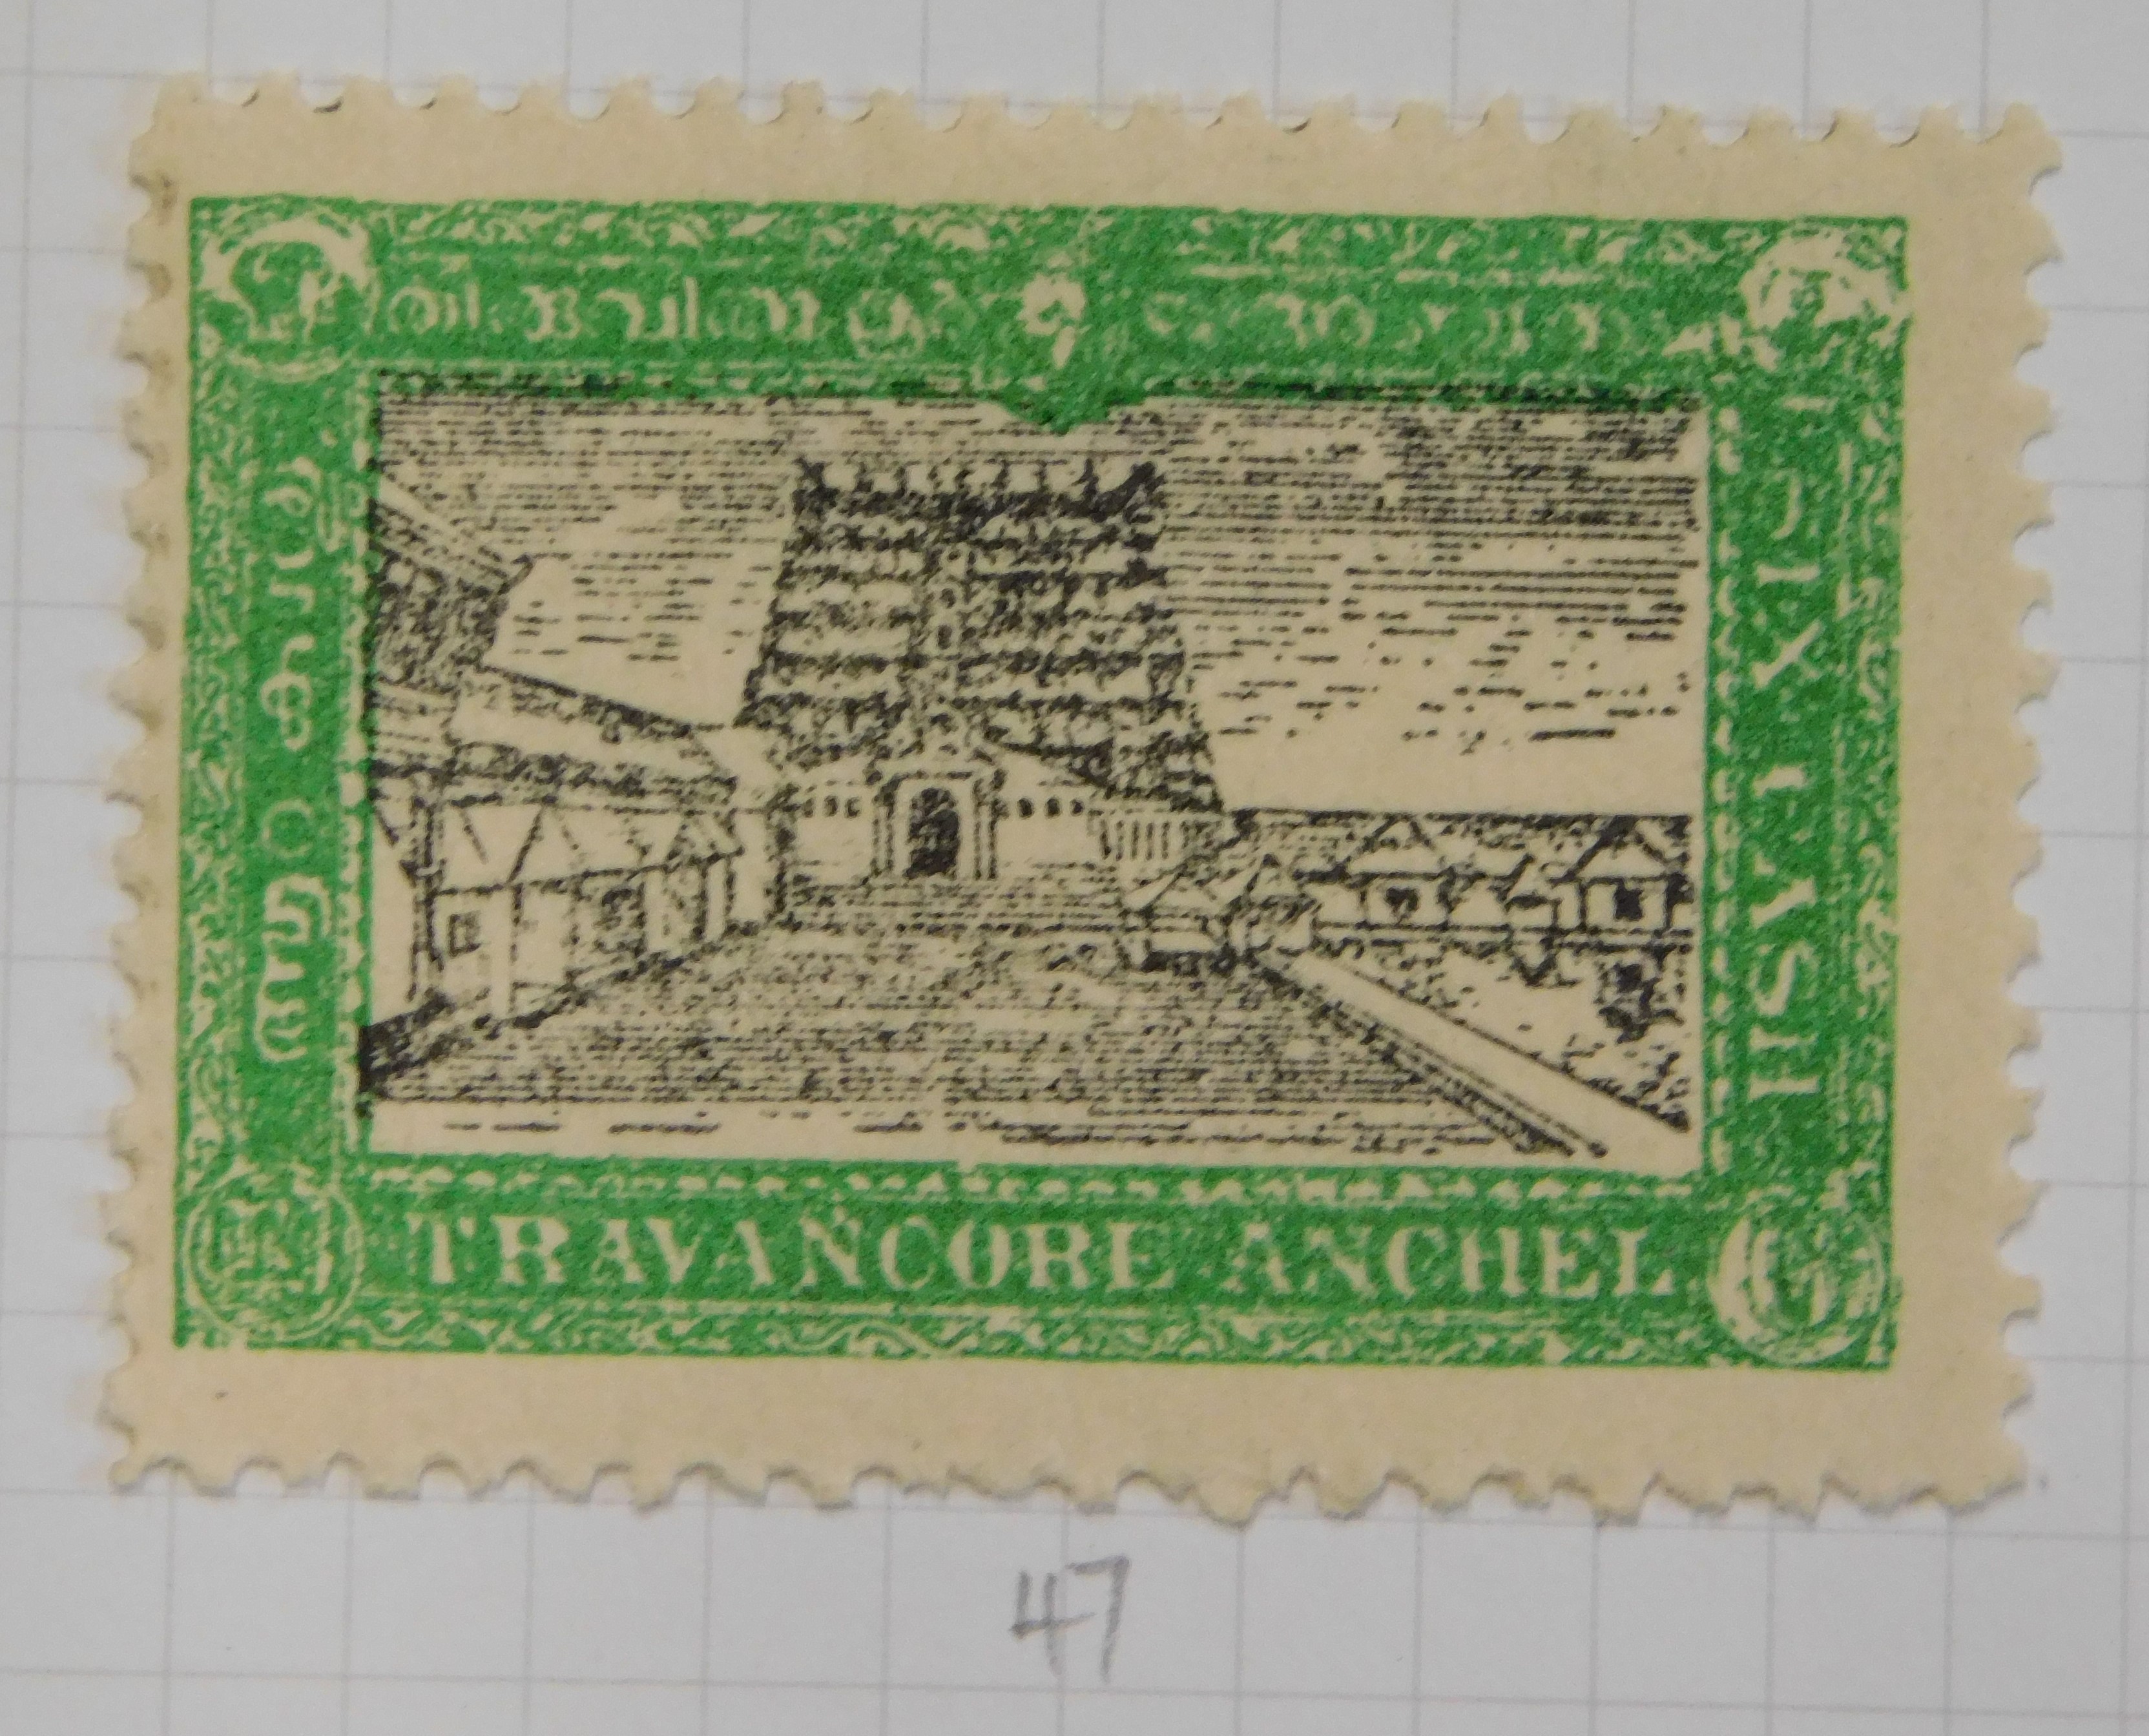 India (Travancore) 1931-1932 mint and fine used includes varieties including overprint double and - Image 3 of 5